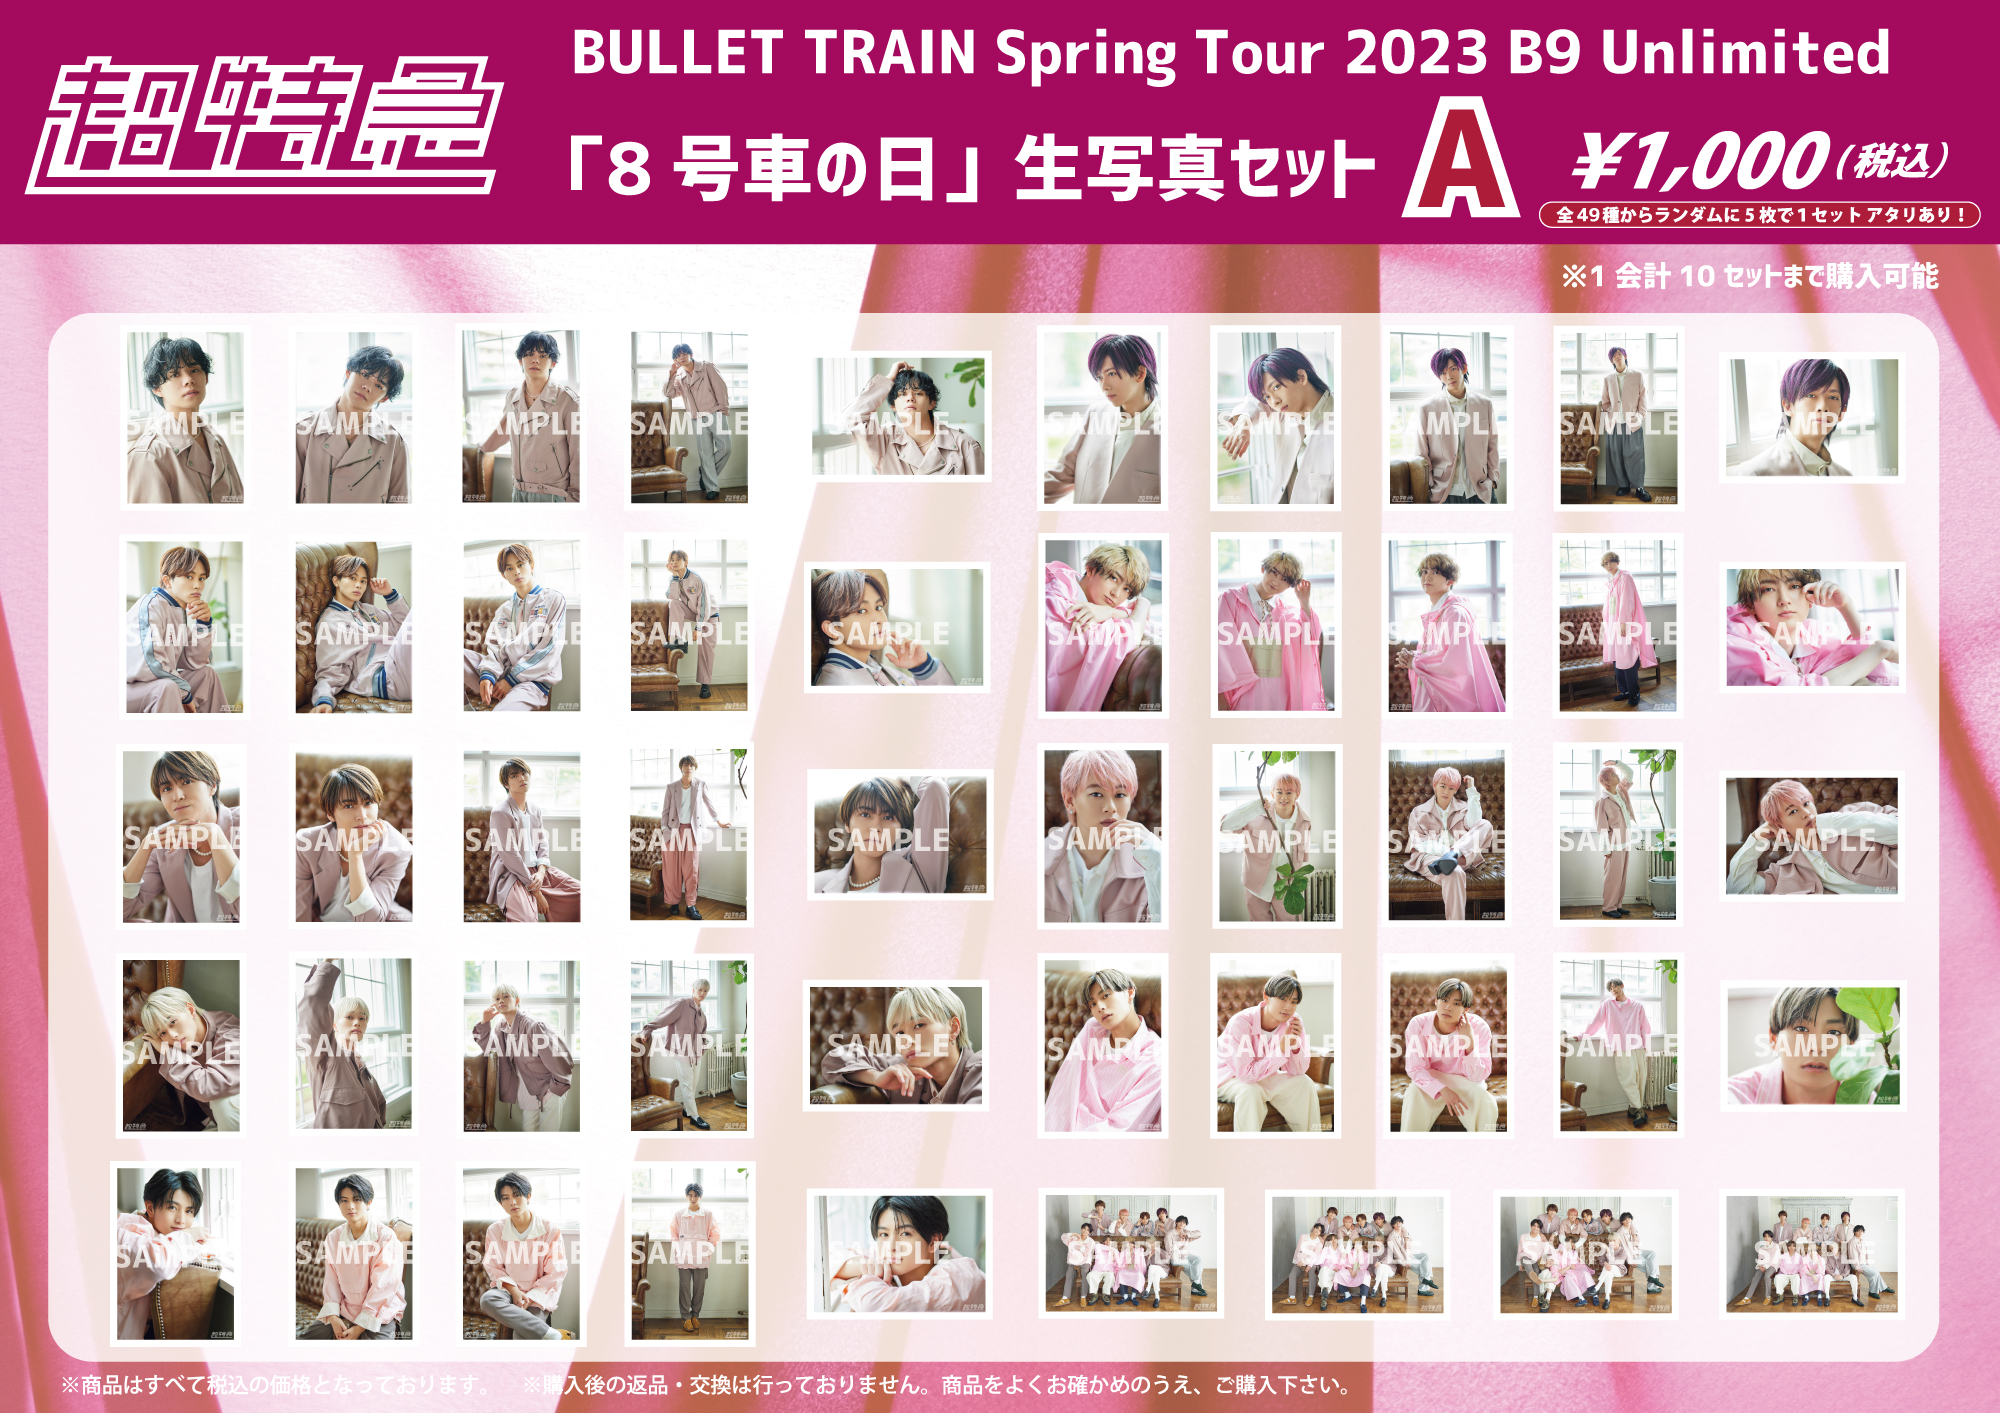 BULLET TRAIN Spring Tour 2023「B9 Unlimited」8号車の日 会場販売の 